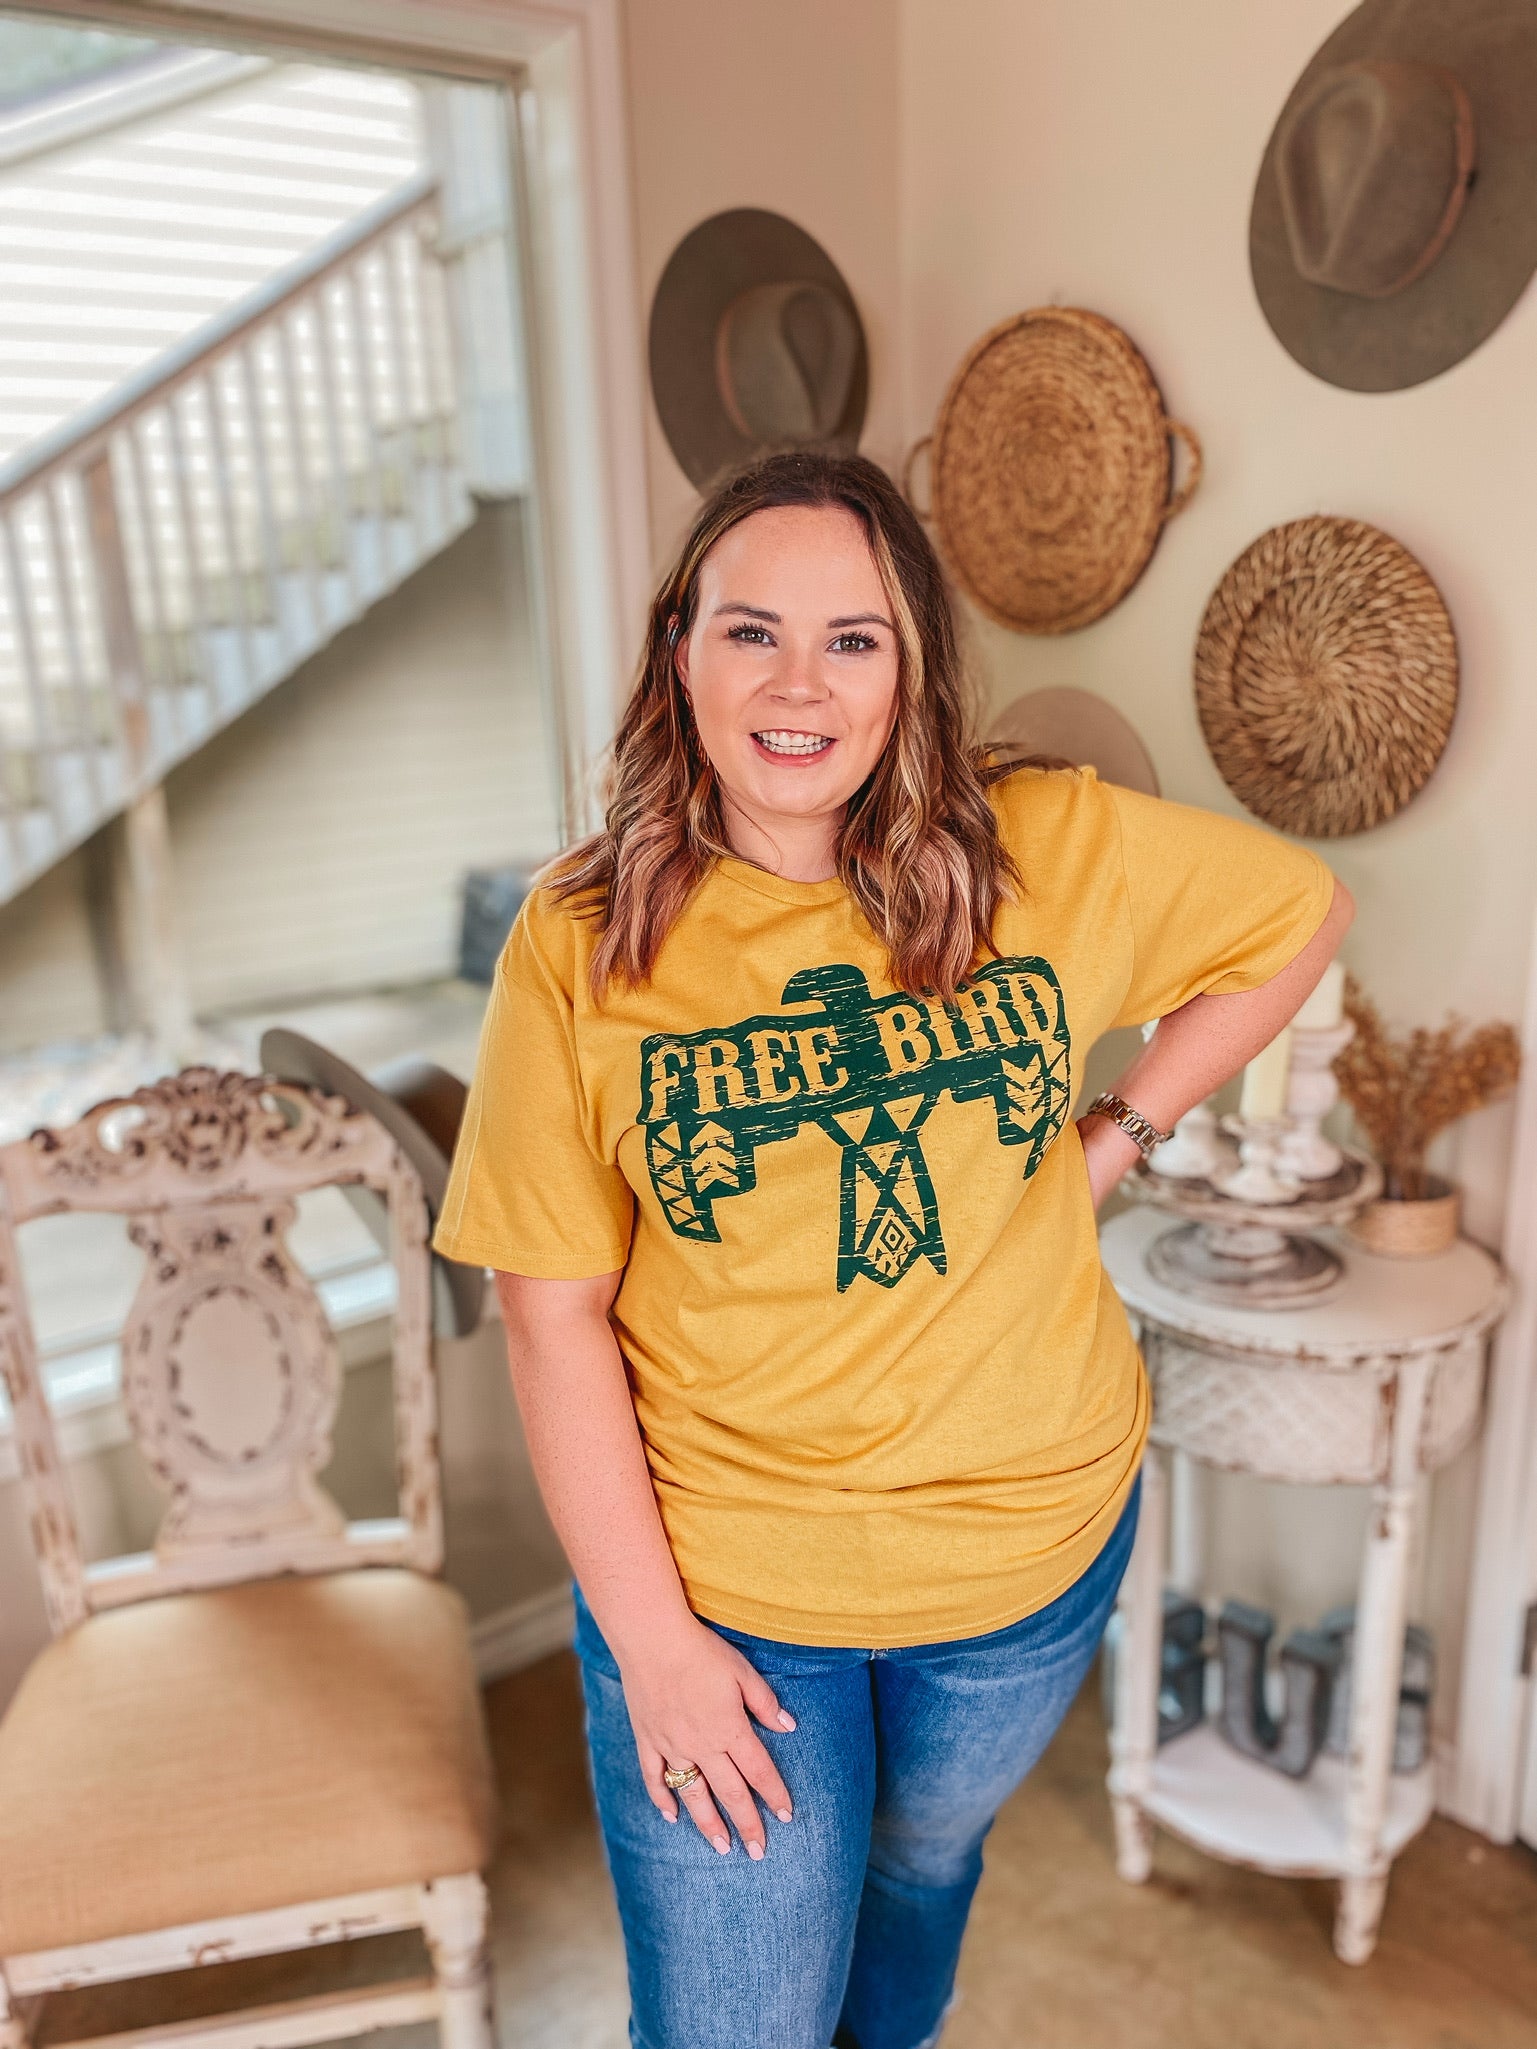 Free Bird Thunderbird Short Sleeve Graphic Tee in Mustard Yellow - Giddy Up Glamour Boutique